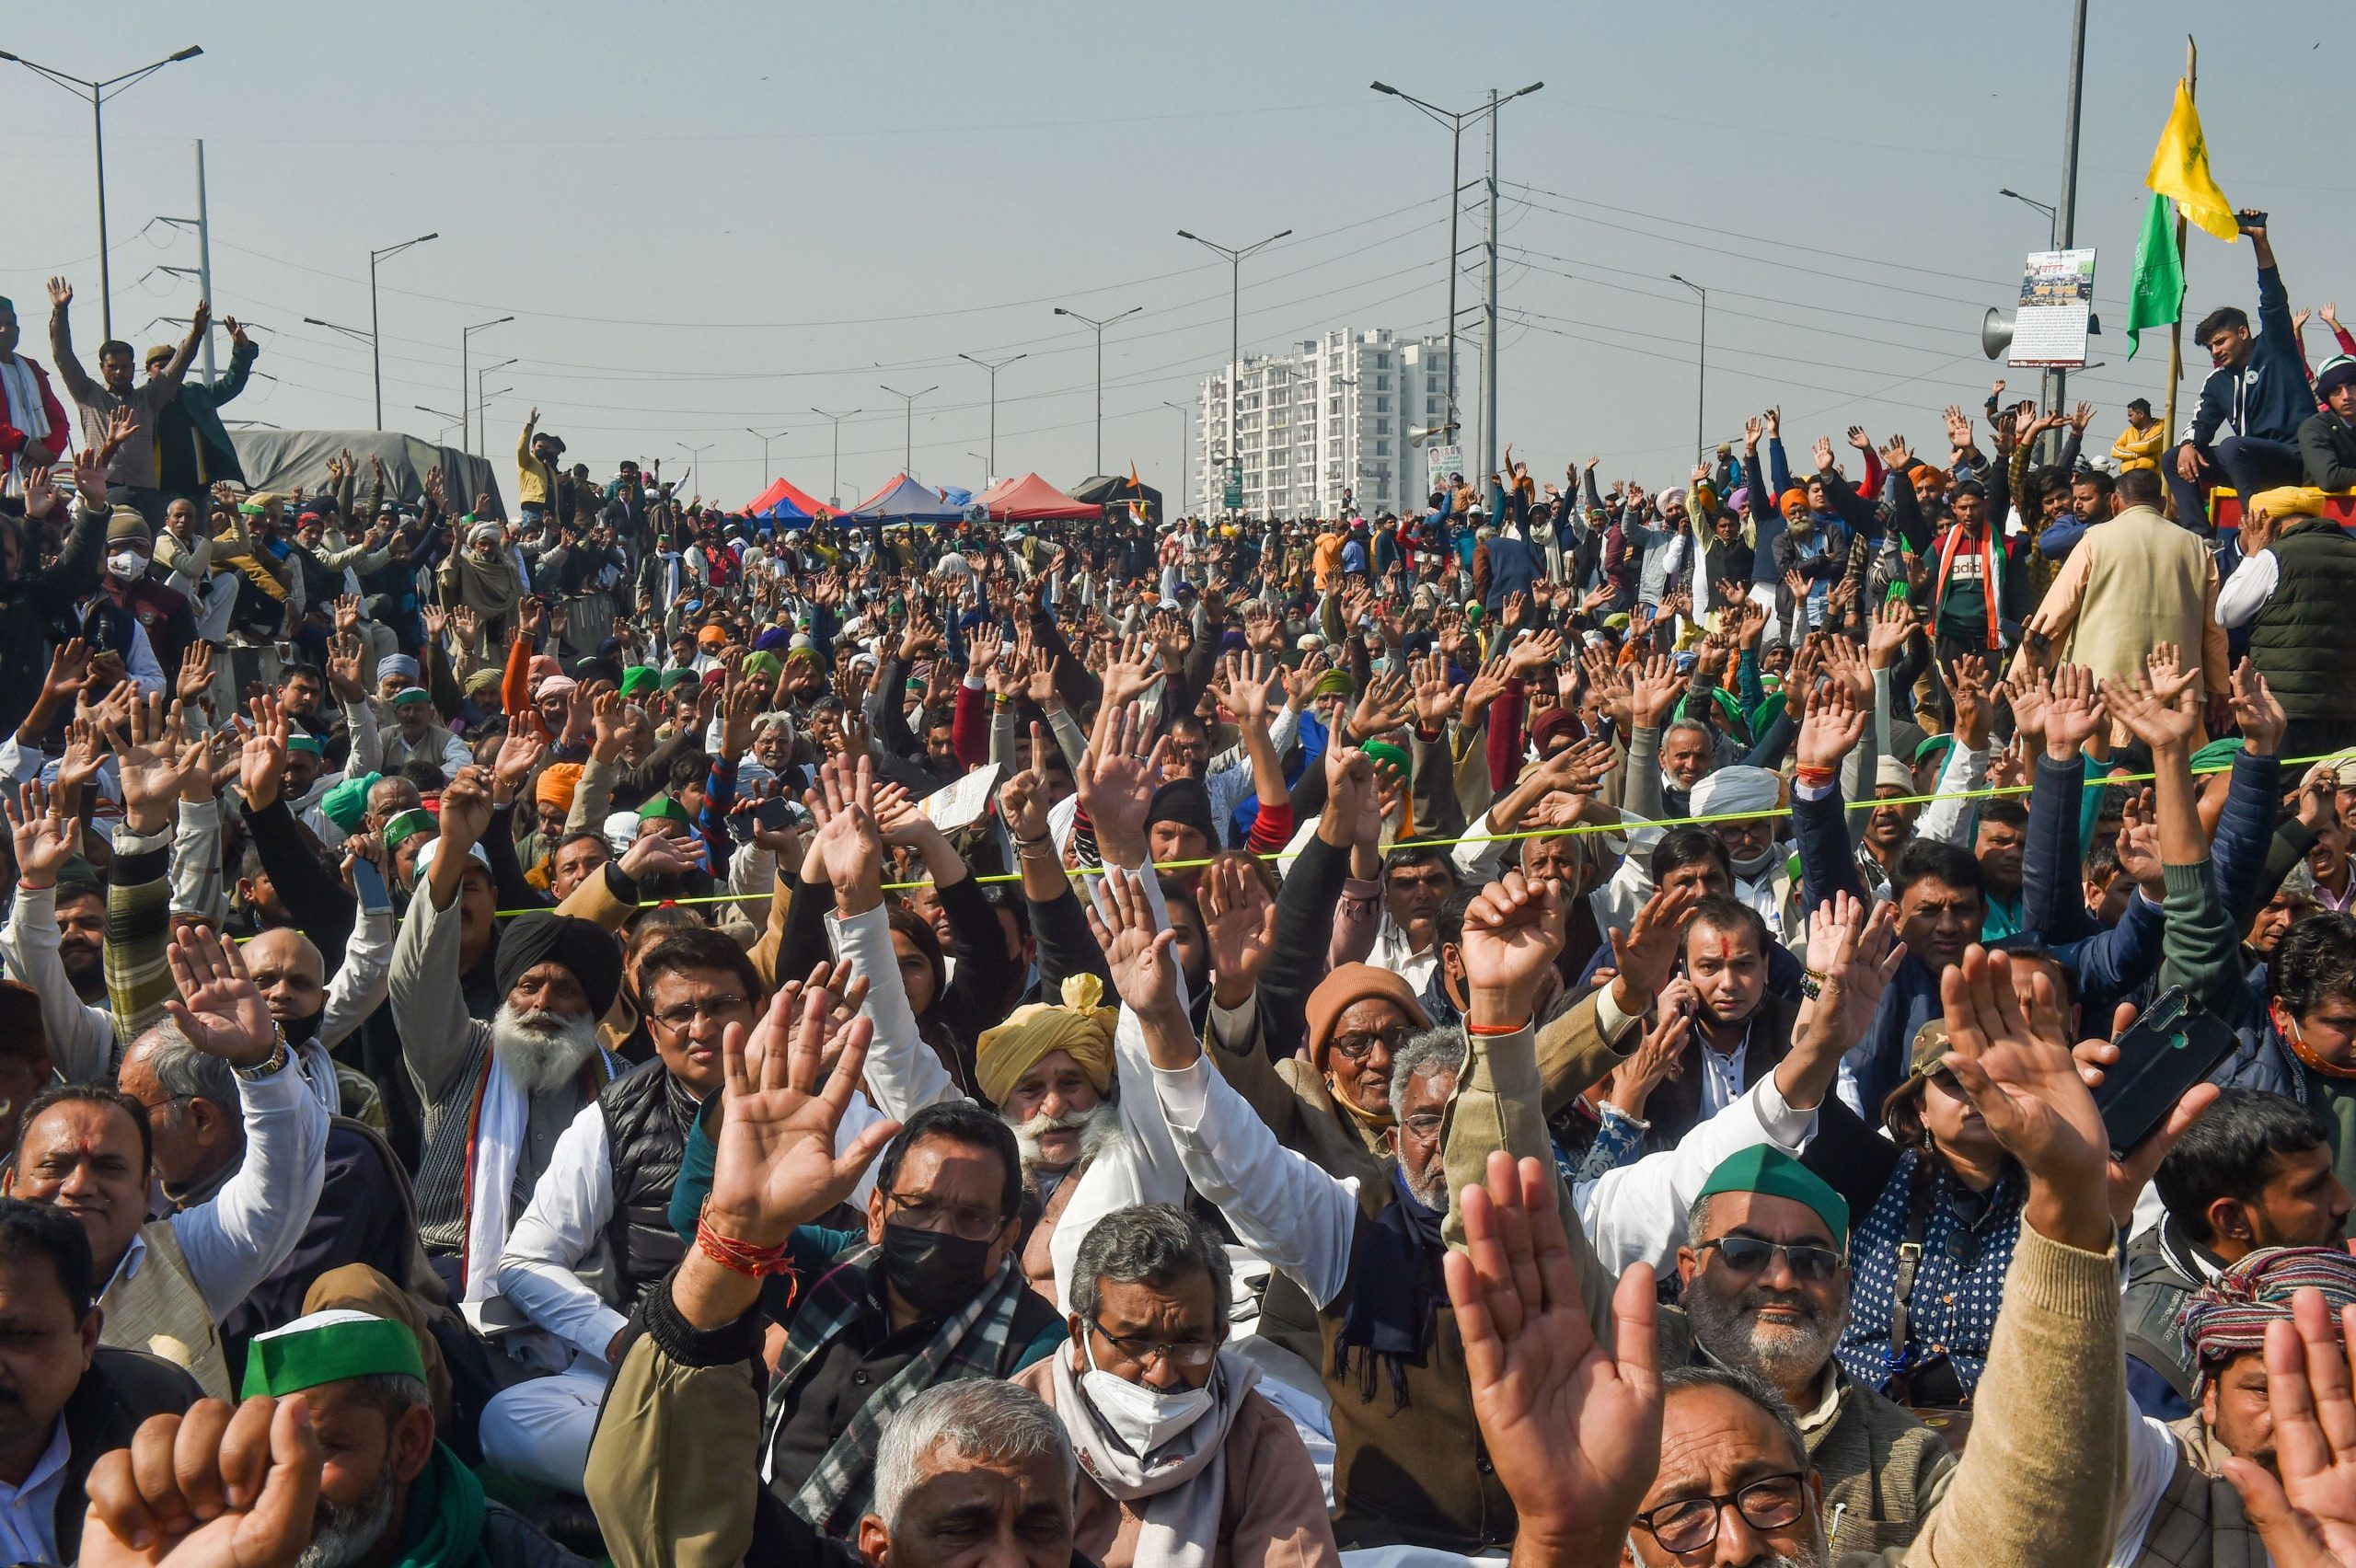 Farmer leaders expect larger protest gathering in Delhi by Feb 22, police strengthen security